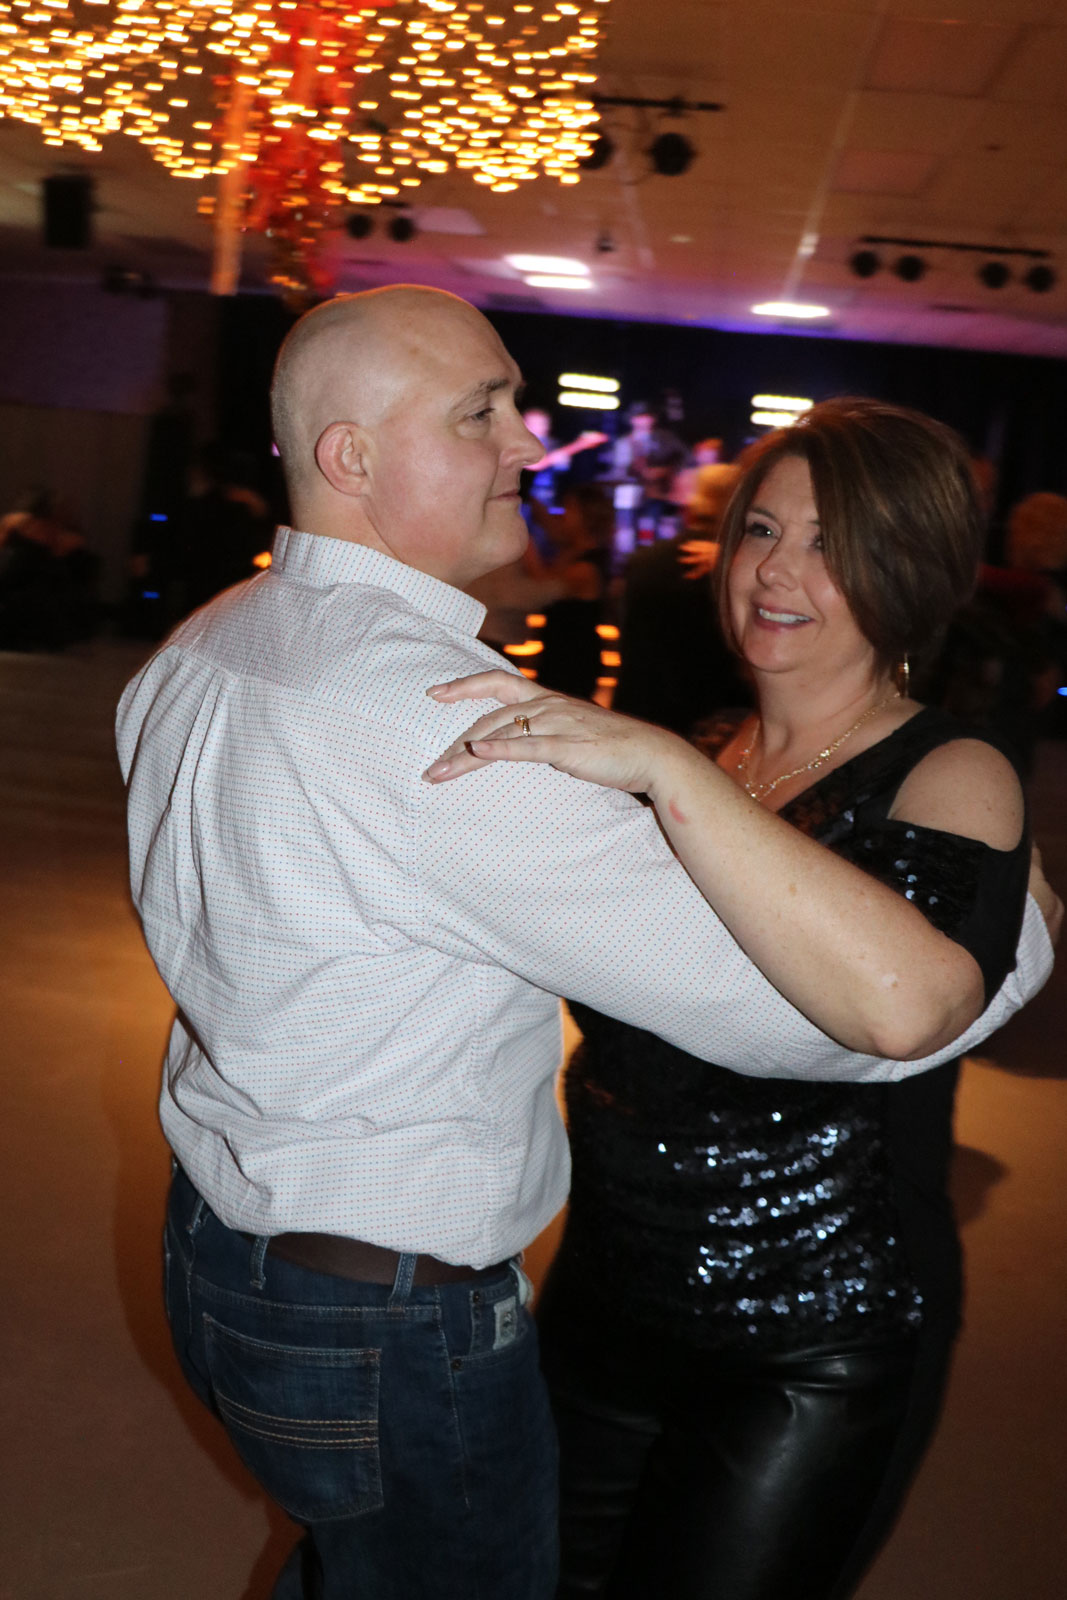 Sagebrush & Roses guests Doyle and Ronda Meyer enjoying some dancing to Tris Munsick and the Innocents